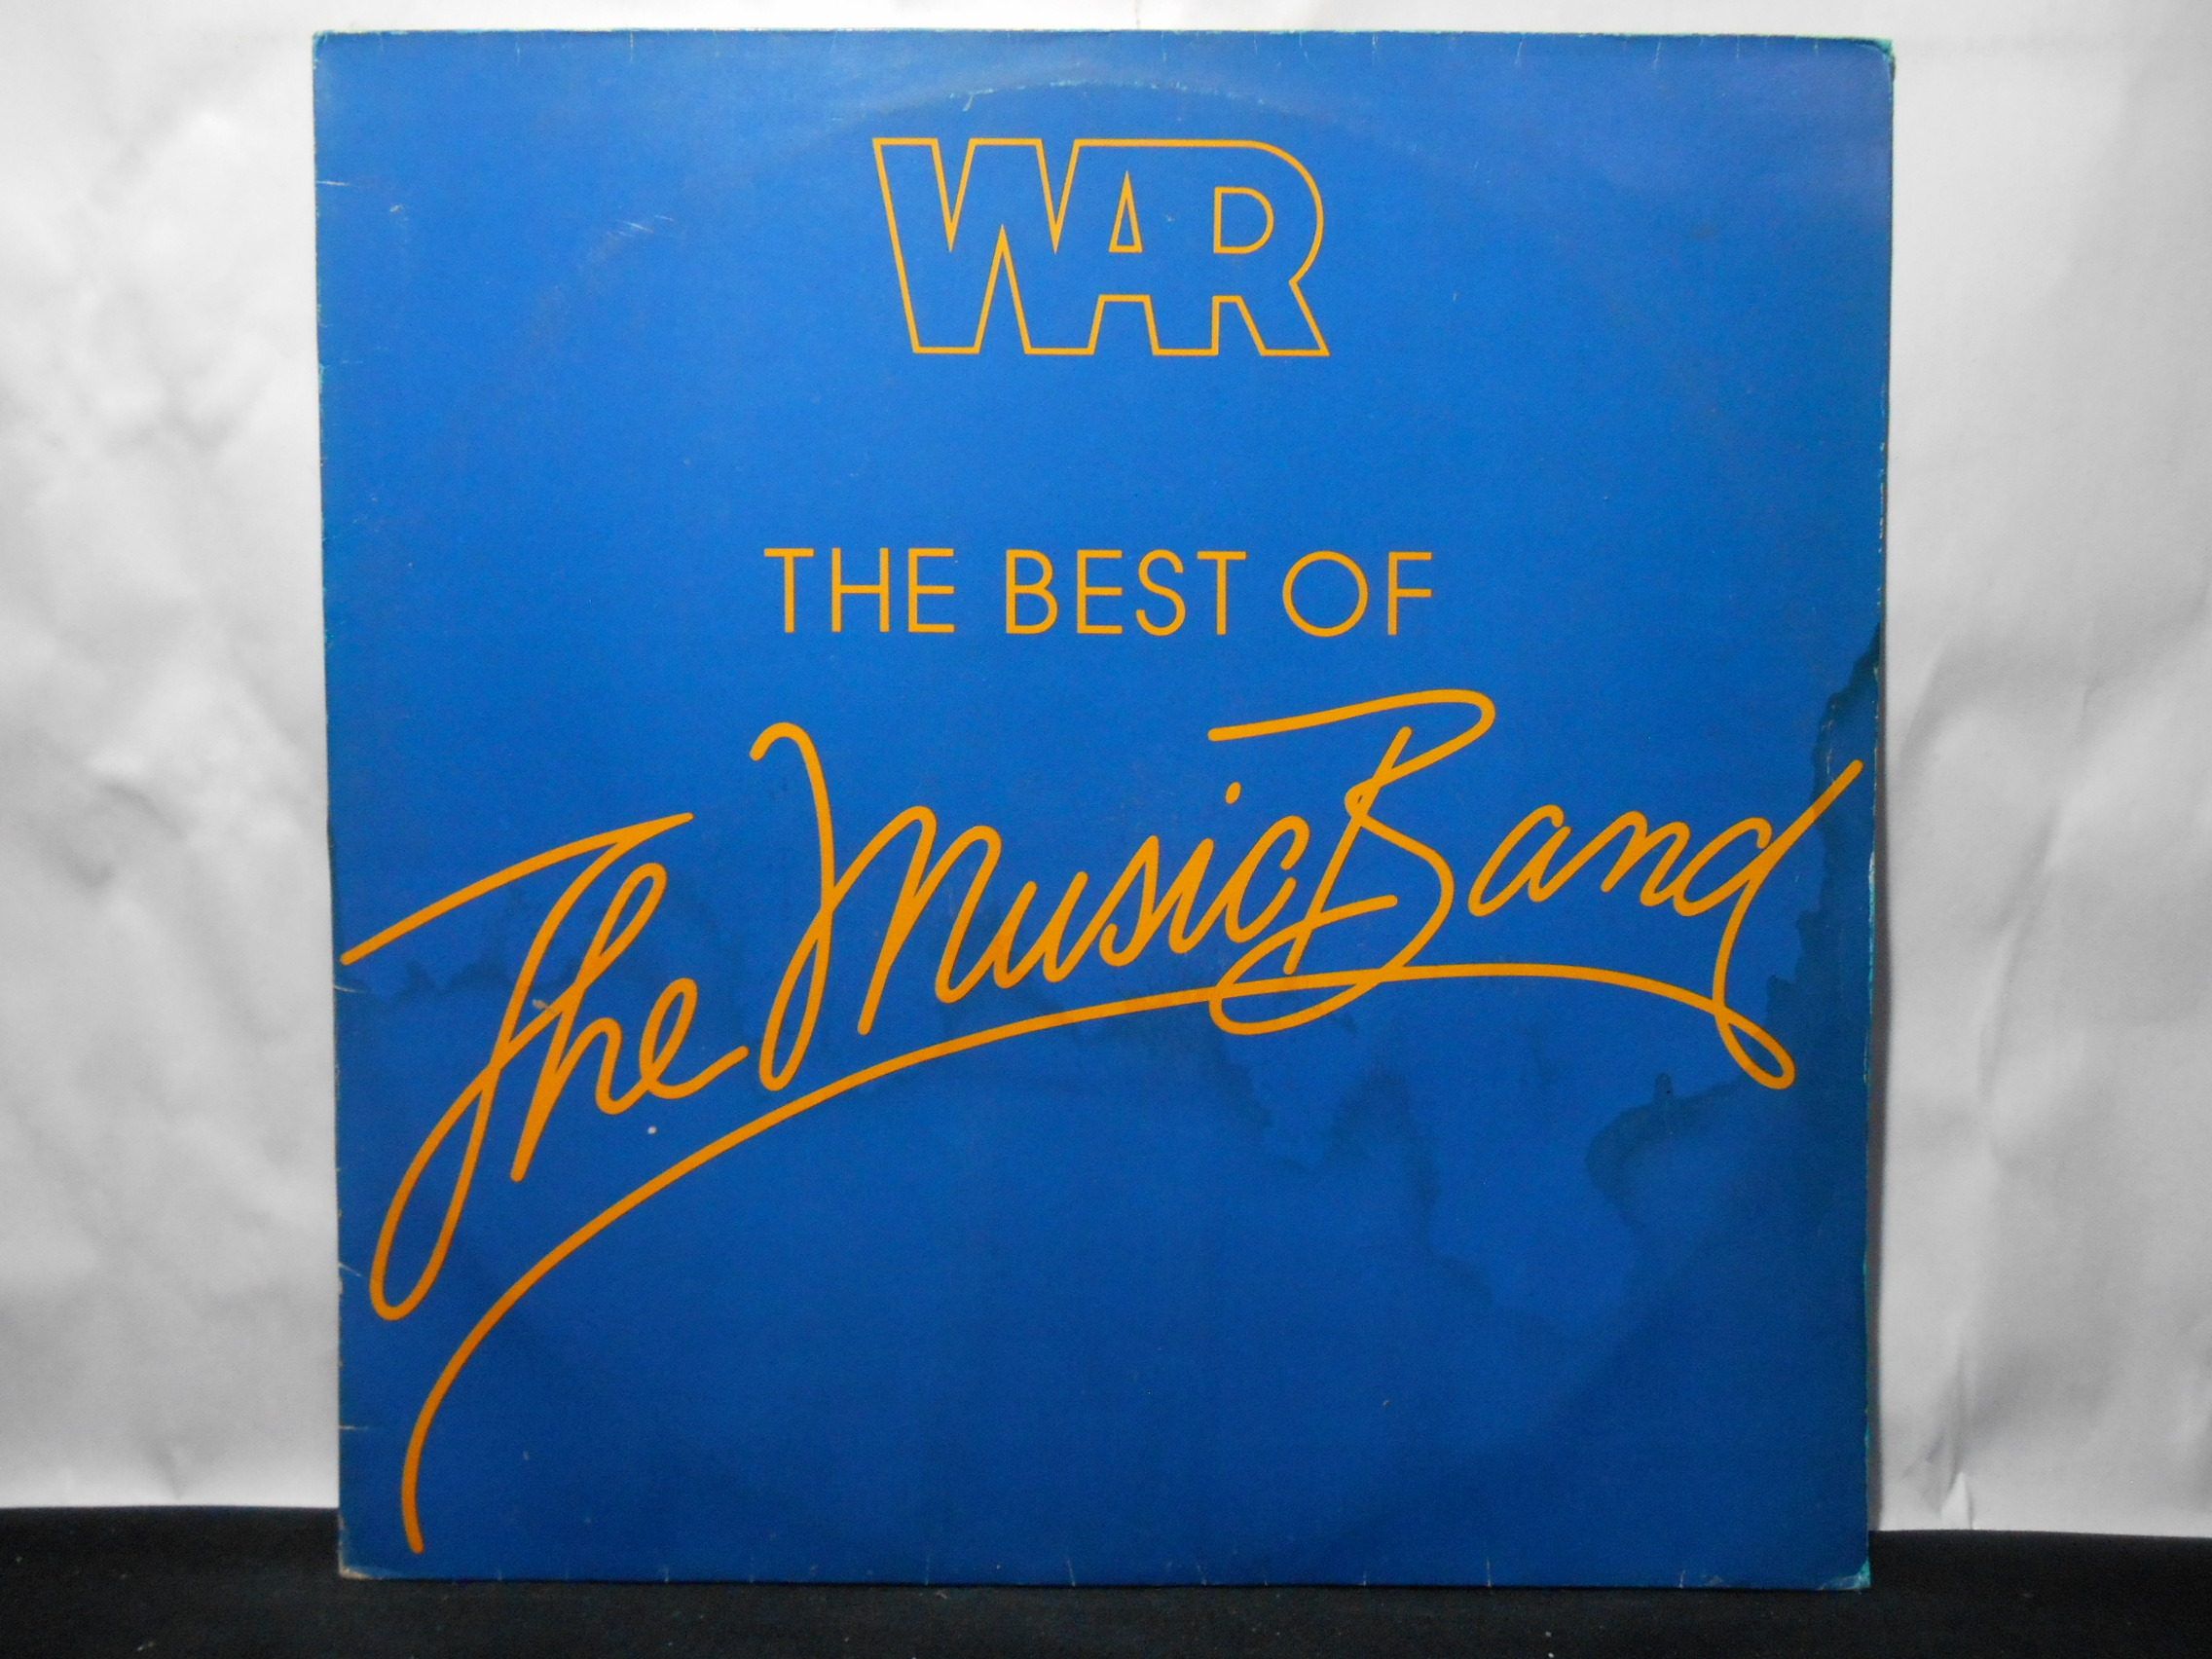 Vinil - War - The Best of the Music Band